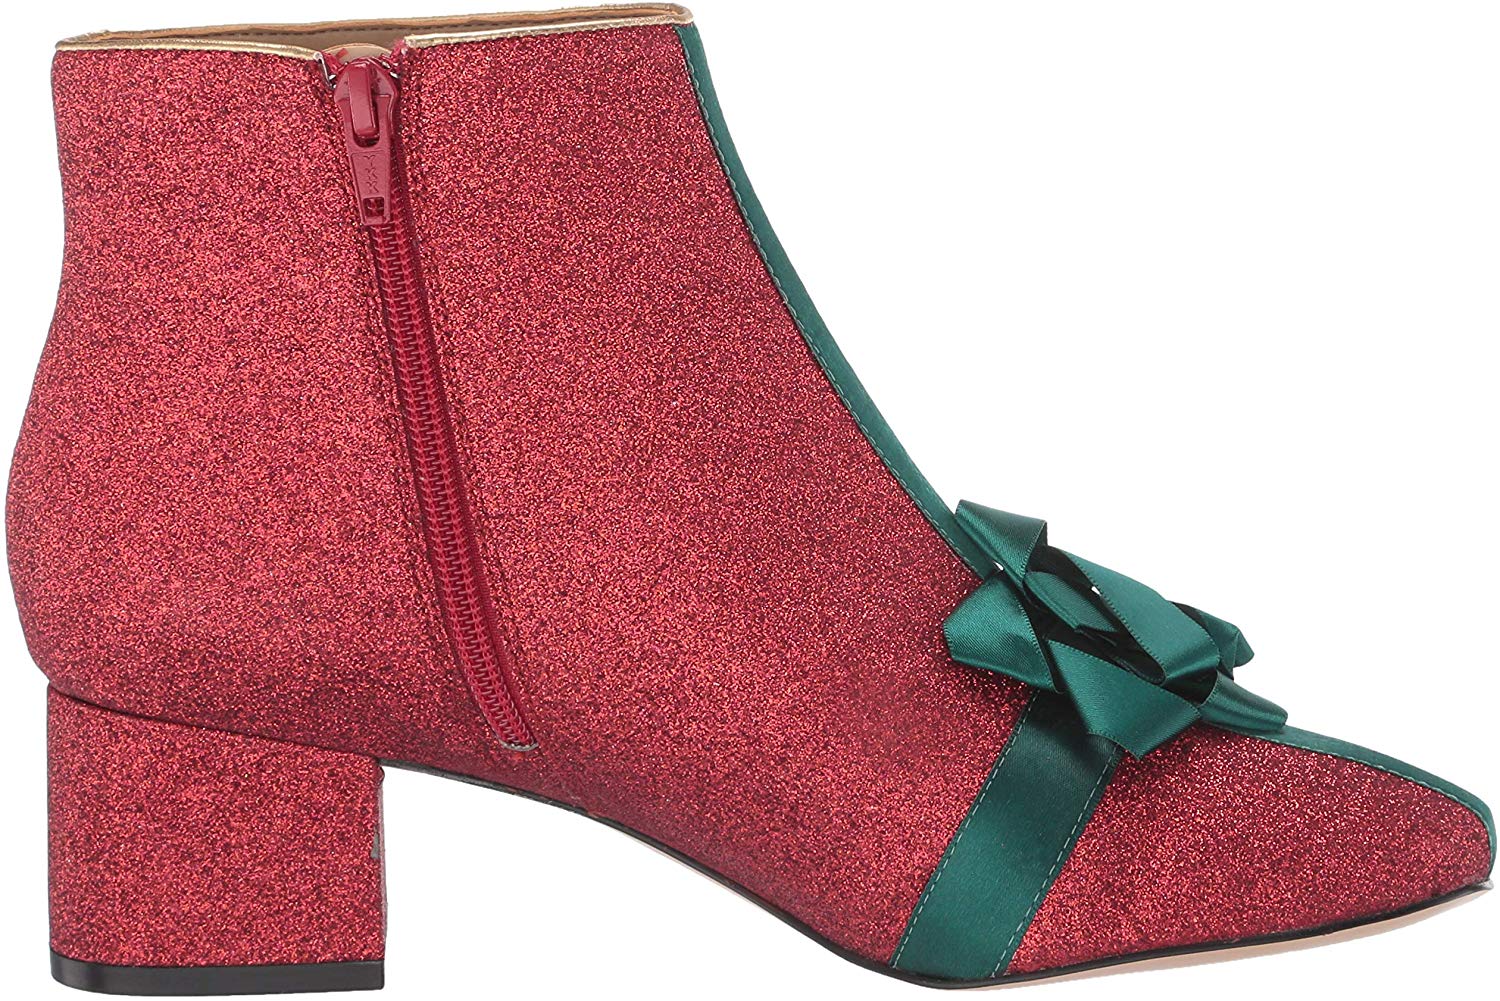 Katy Perry Women's The Gifter Ankle Boot, Red, Size 10.0 jFCD | eBay